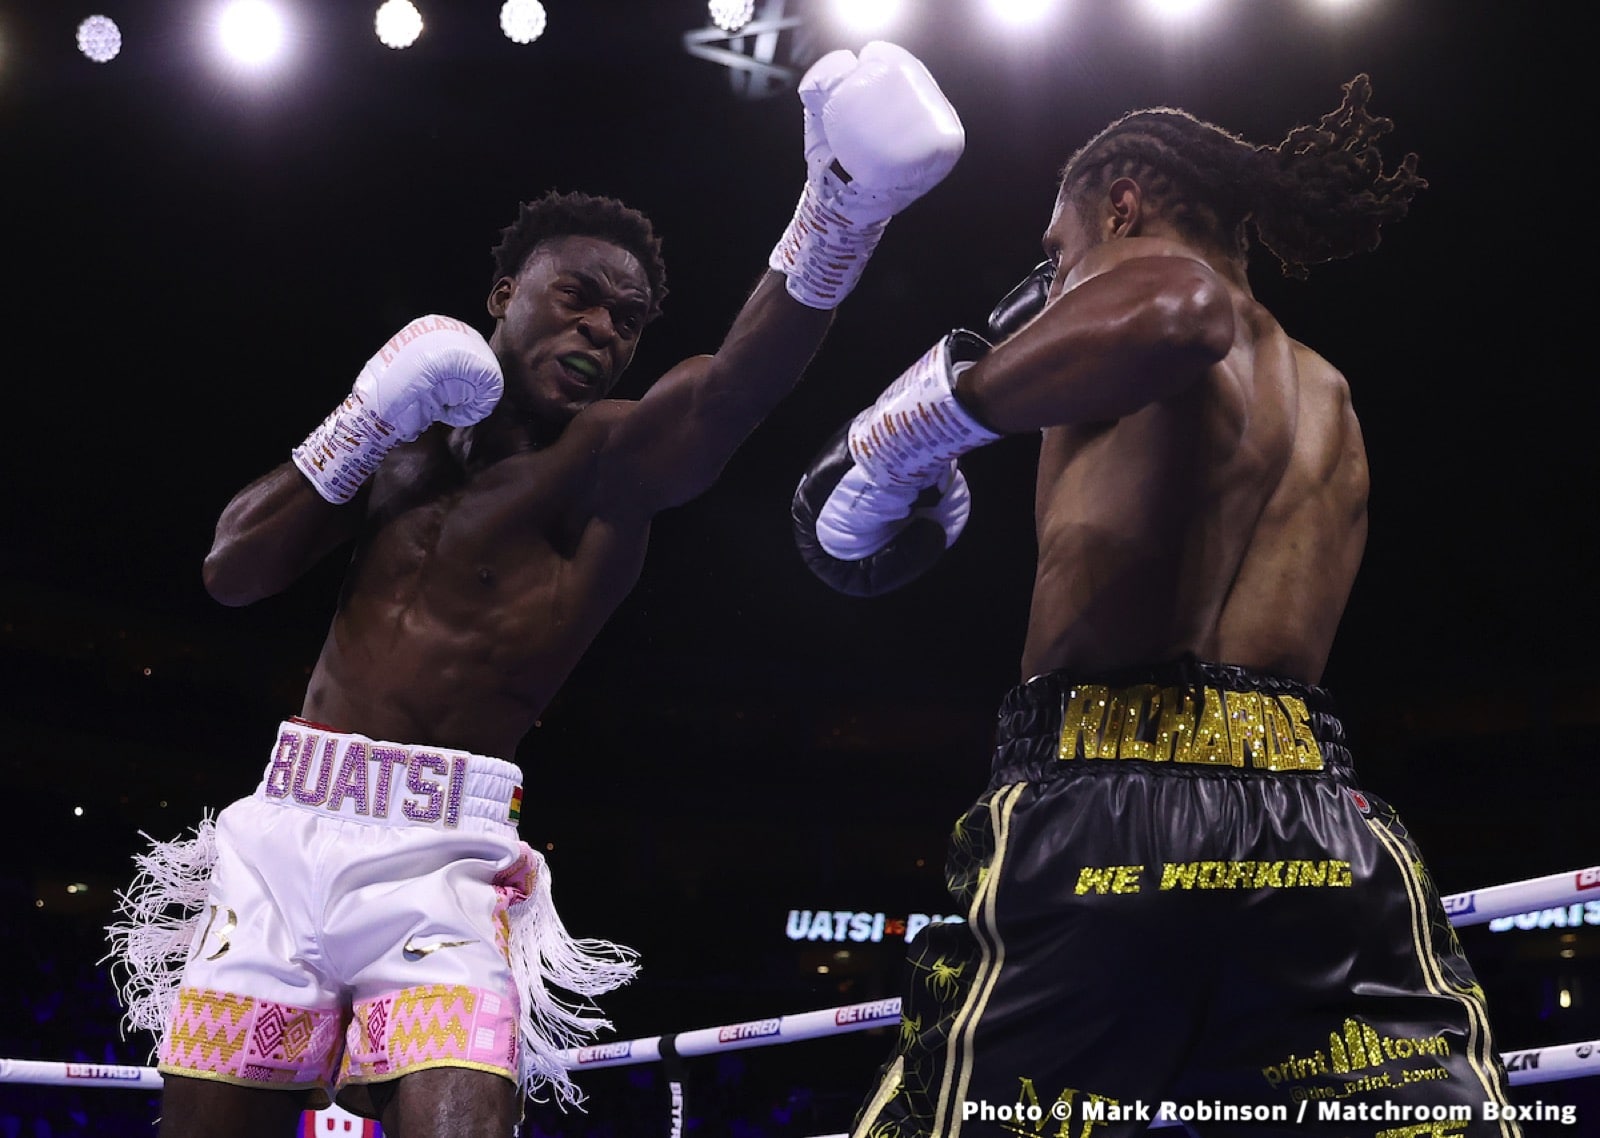 Buatsi vs. Richards LIVE action results from London